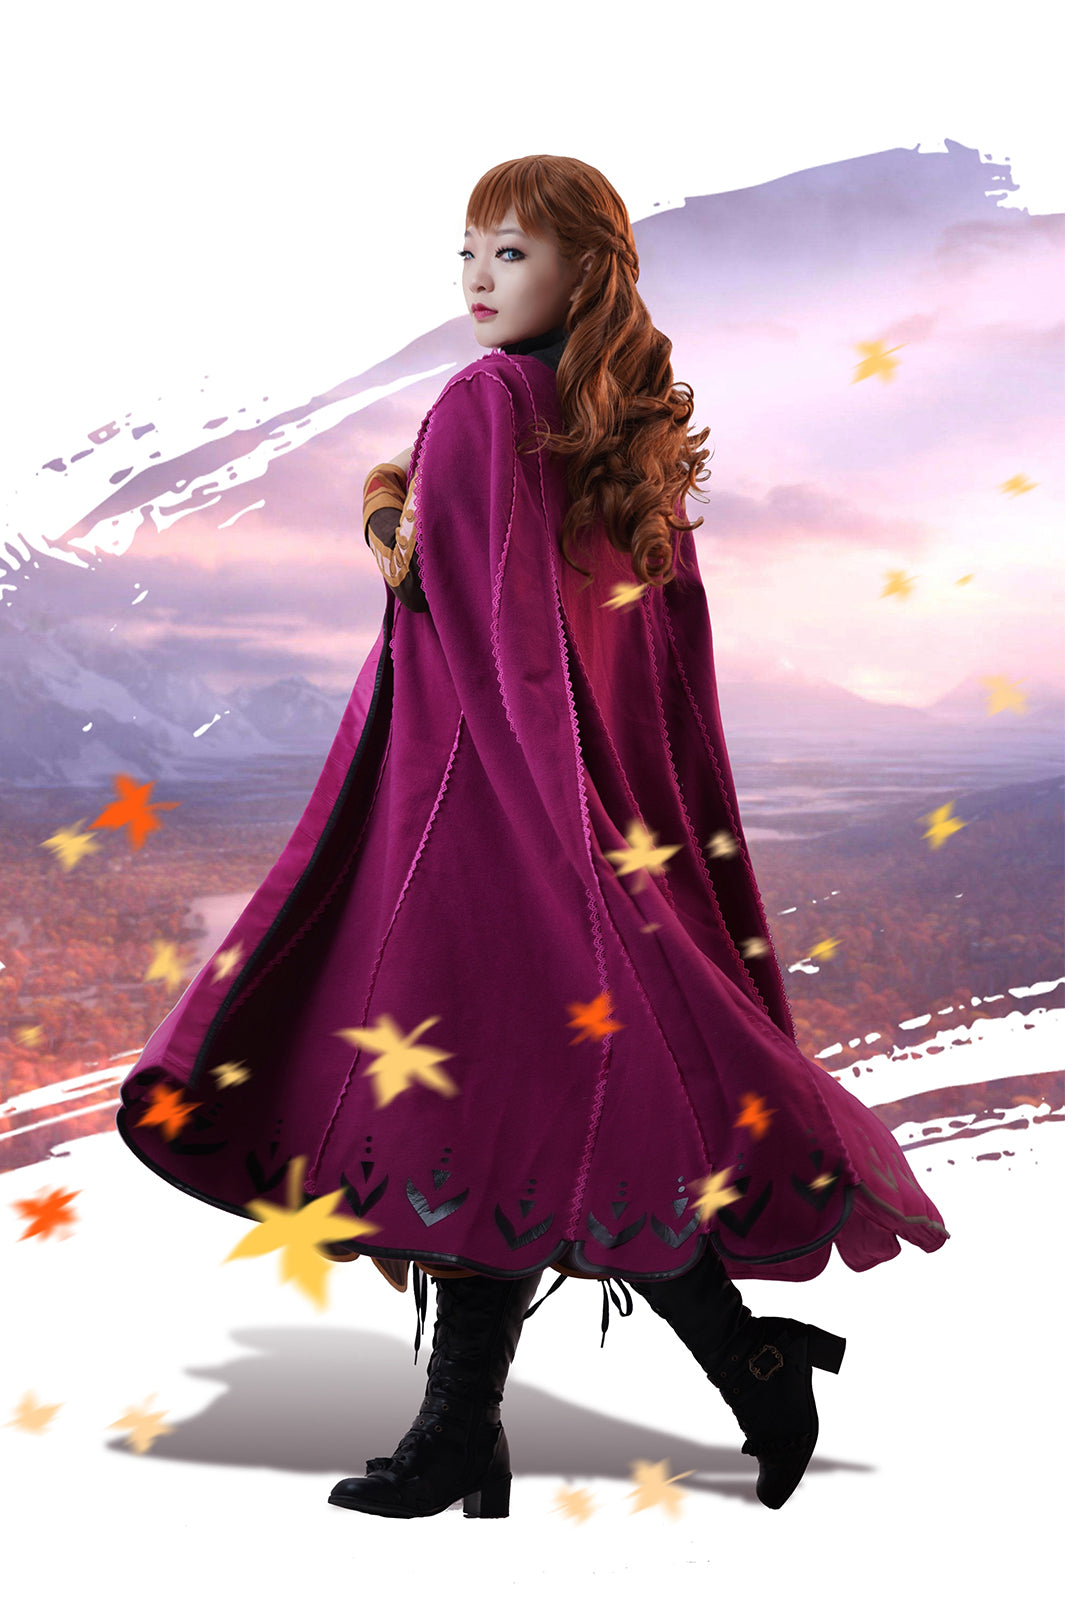 Frozen 2 Anna Deluxe Princess Dress Cosplay Costume Halloween Uniform Full Sets with Cape